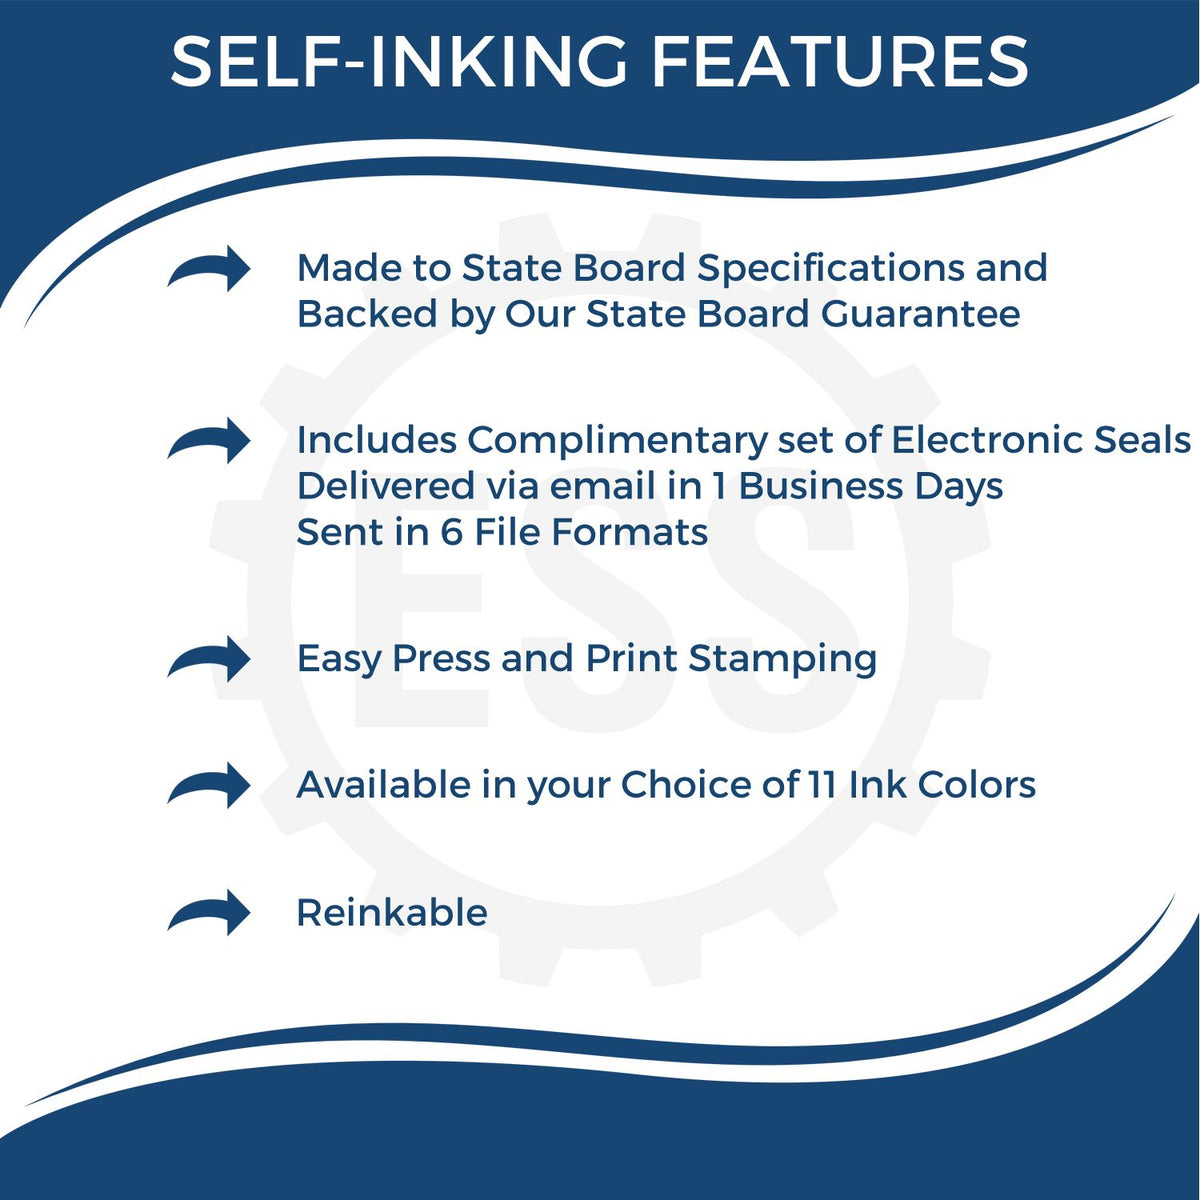 A picture of an infographic highlighting the selling points for the Self-Inking Kentucky Landscape Architect Stamp